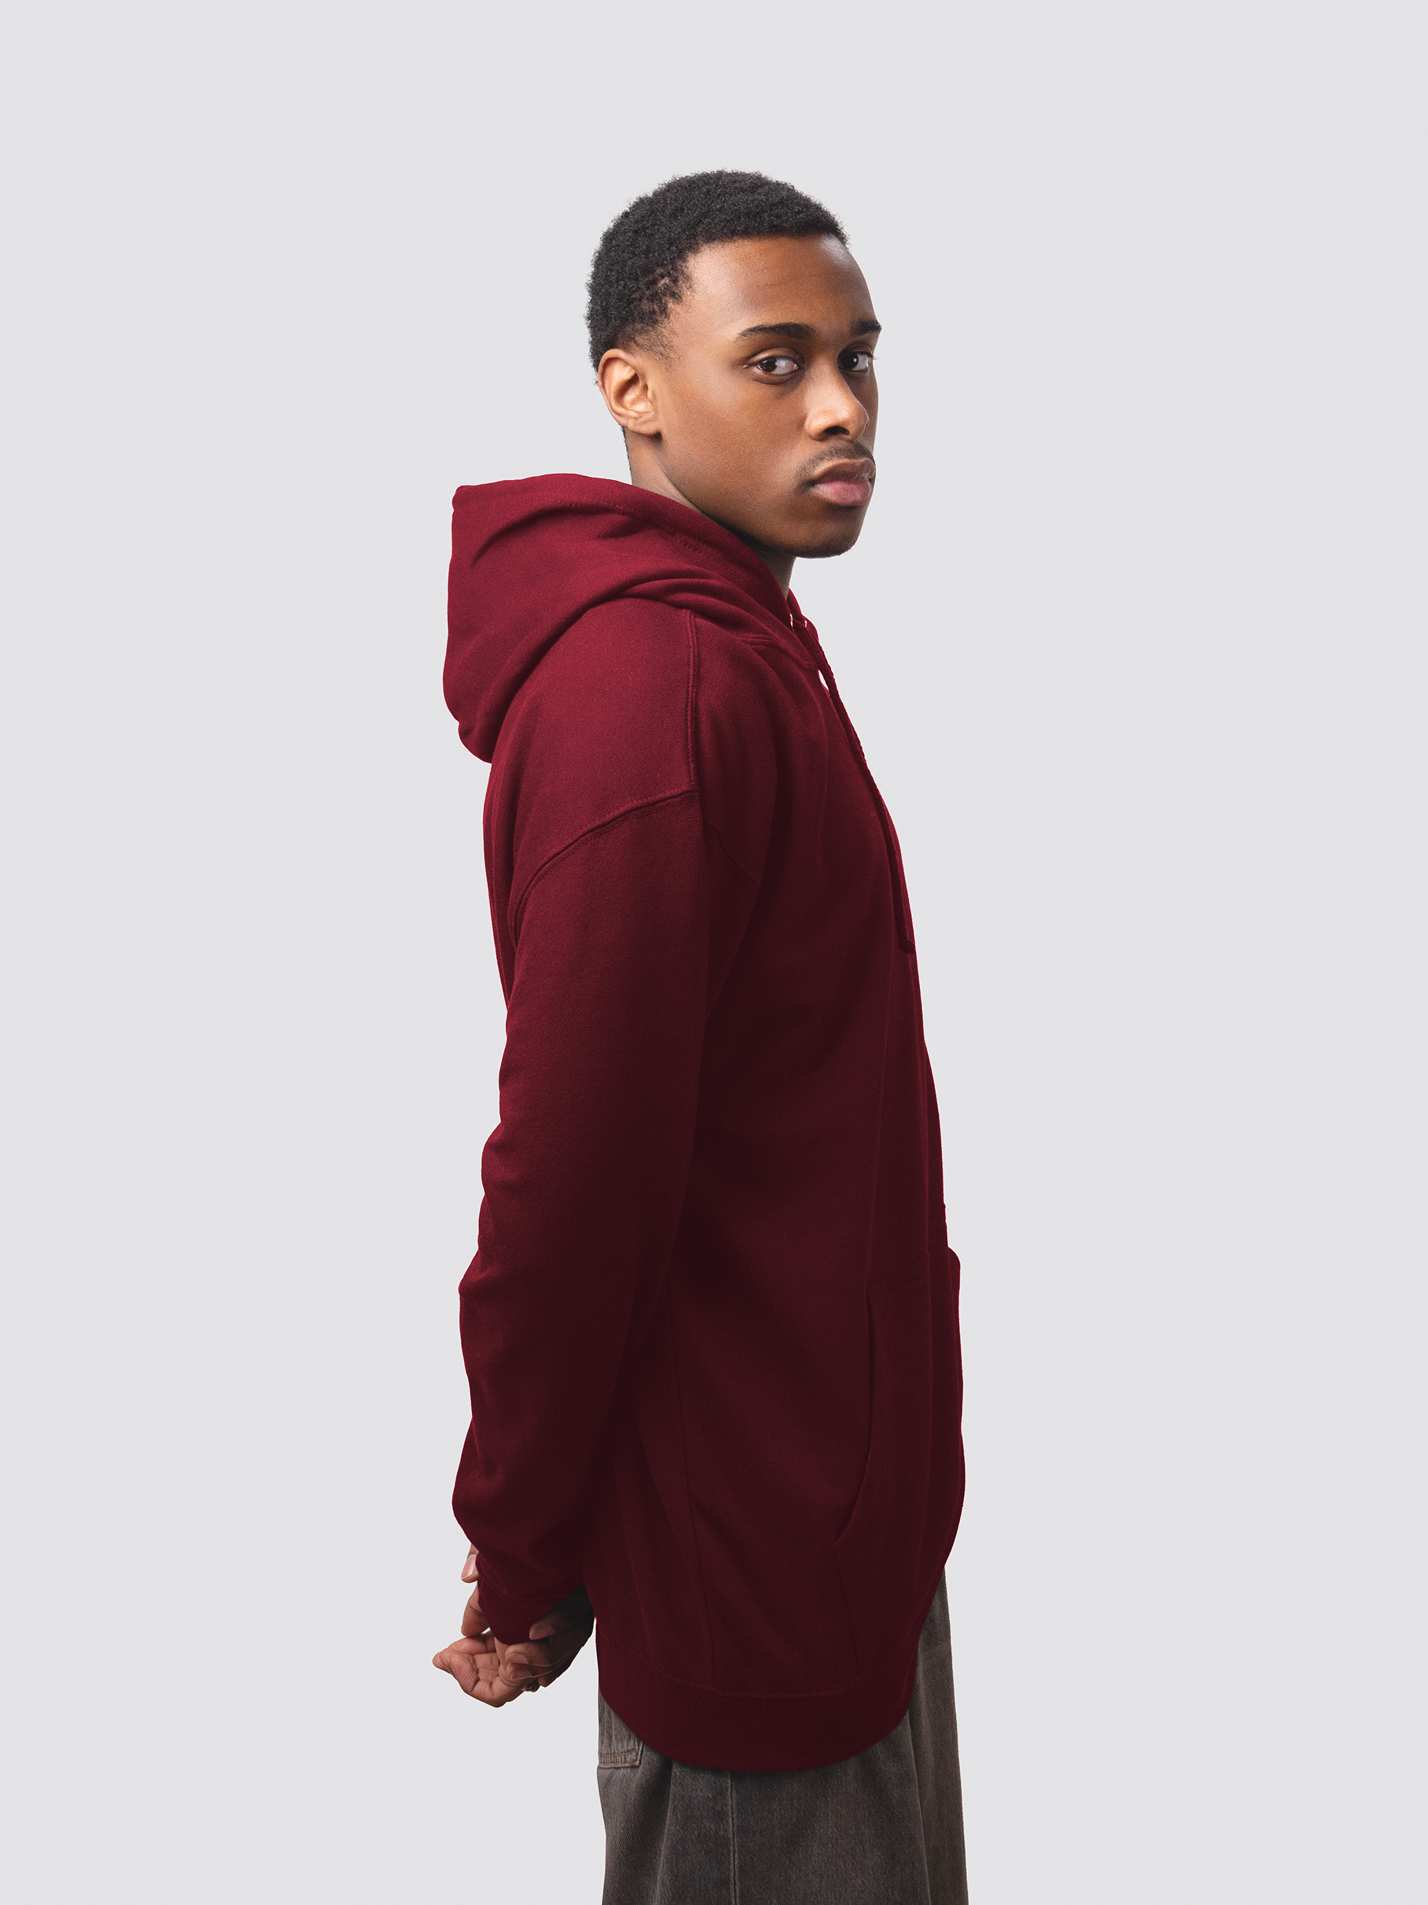 Darwin College hoodie, made from burgundy cotton-faced fabric 